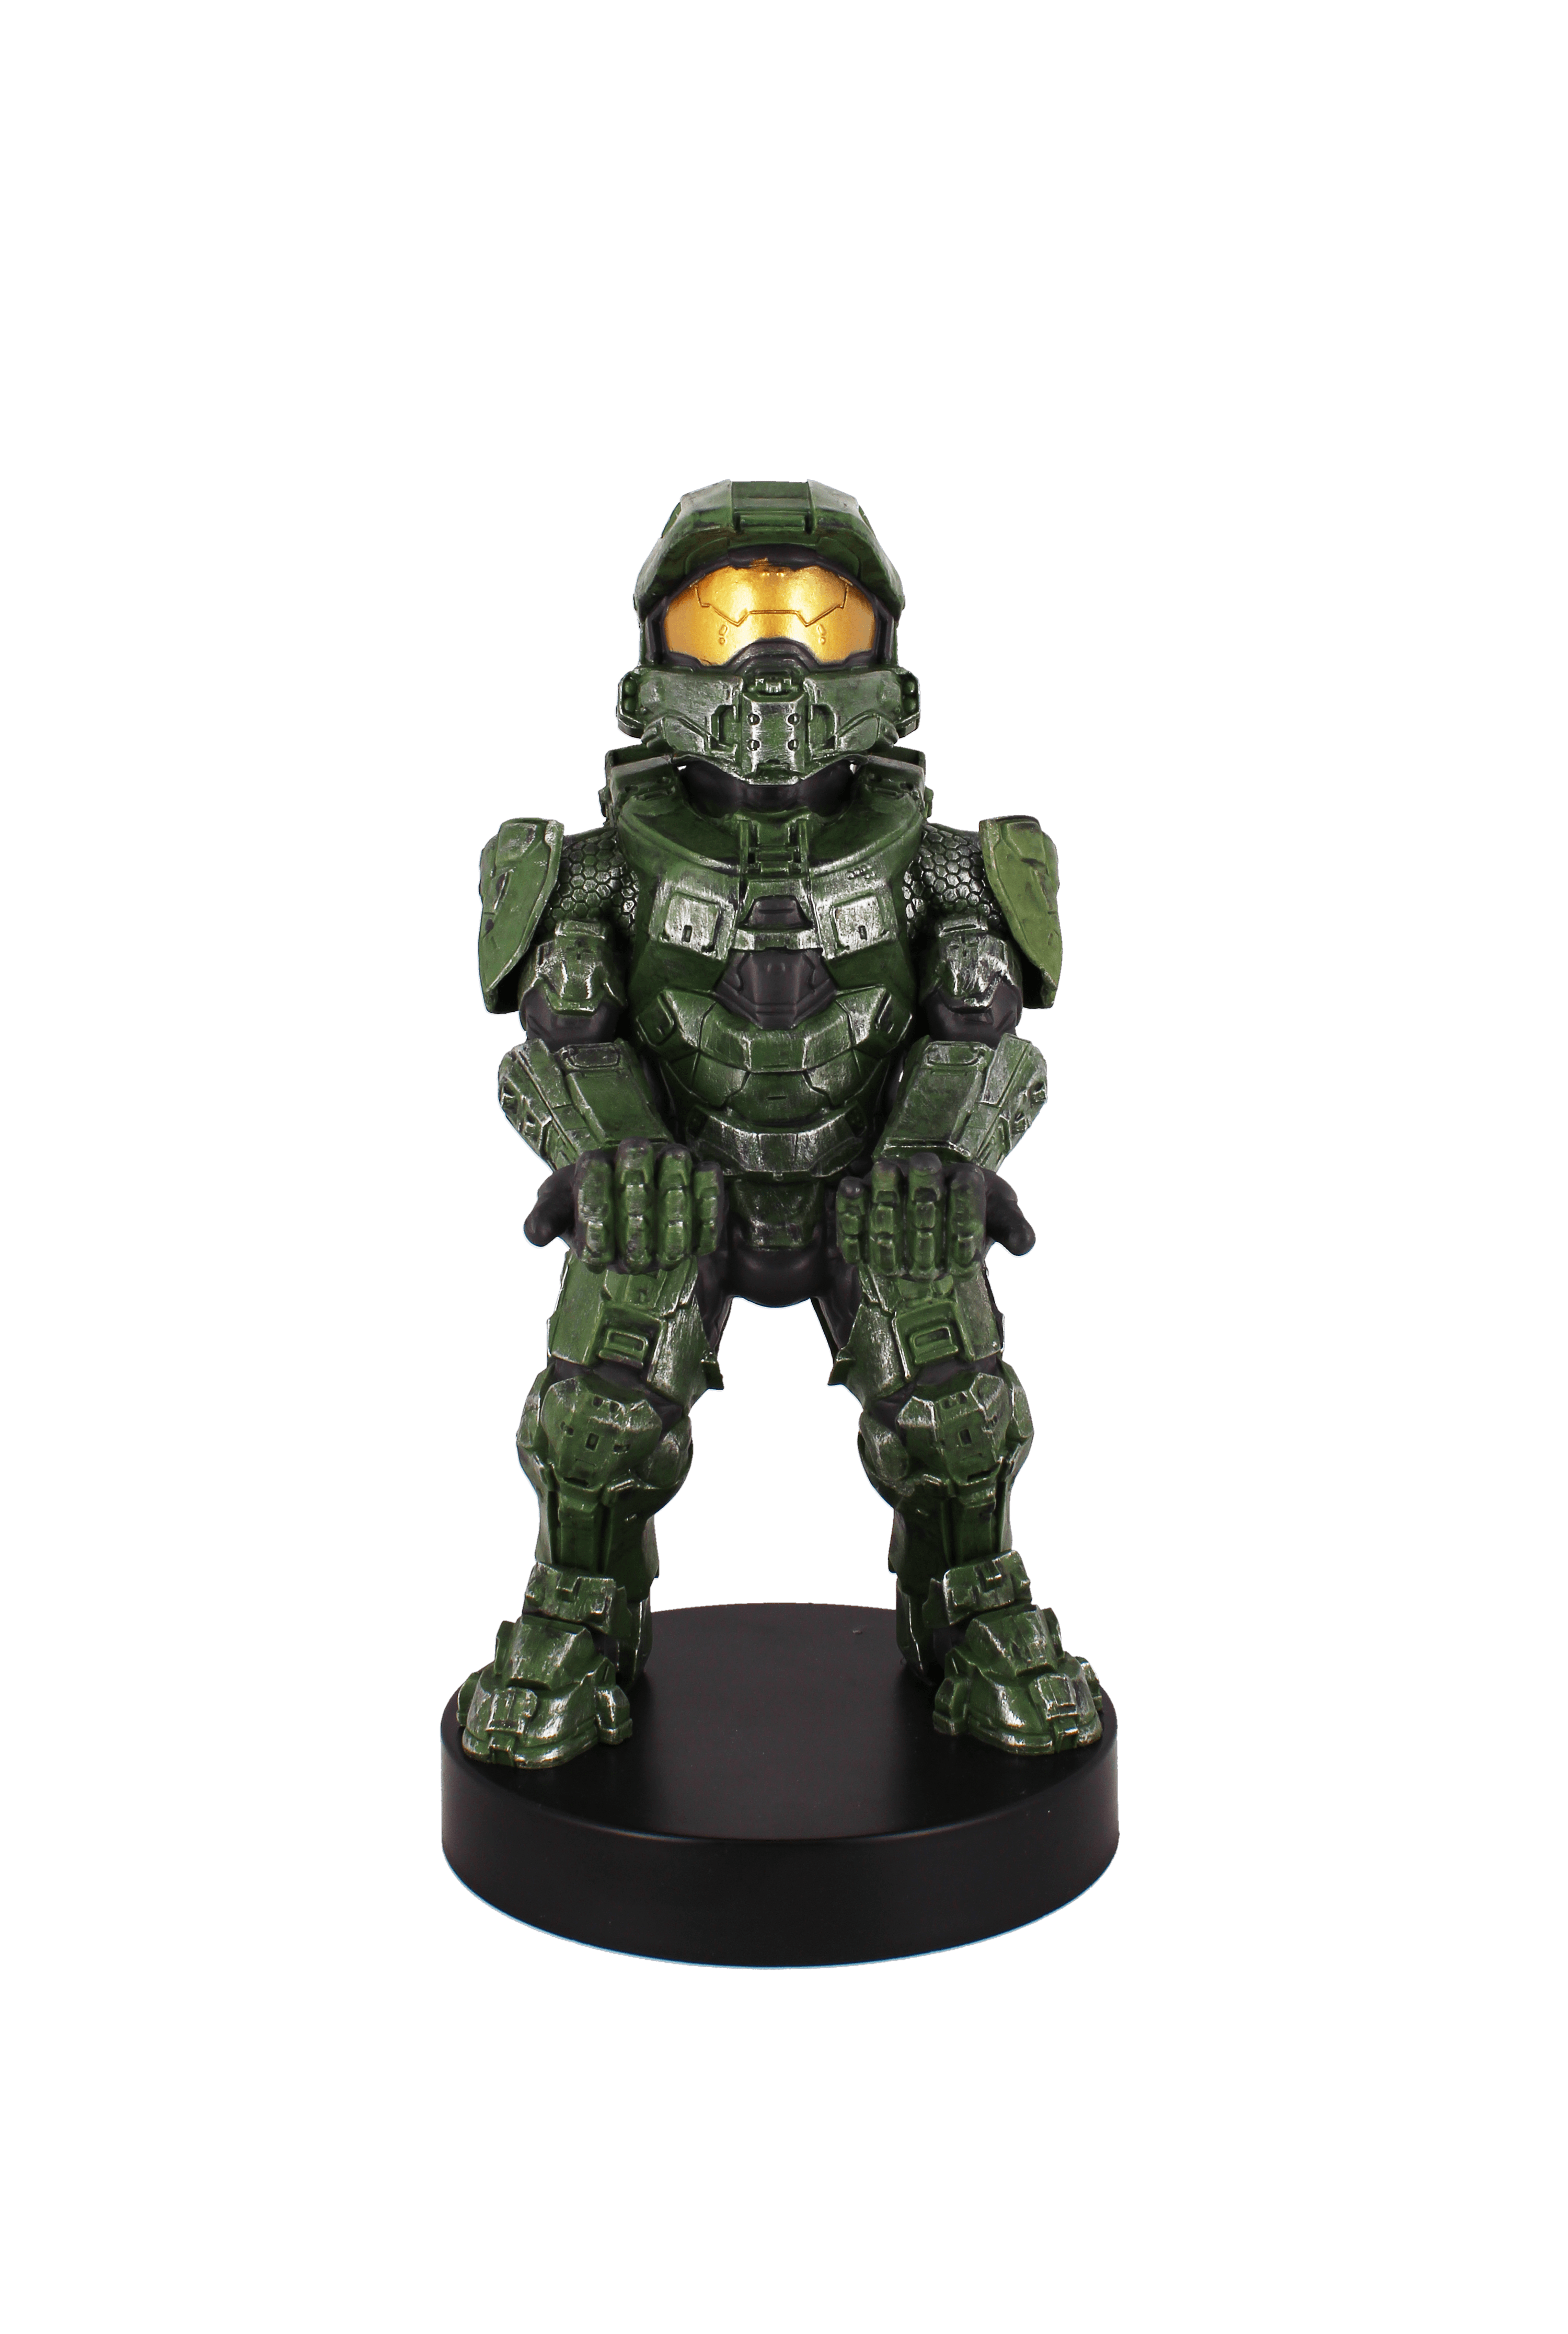 Cable Guys - Halo - Master Chief - Phone & Controller Holder - The Card Vault